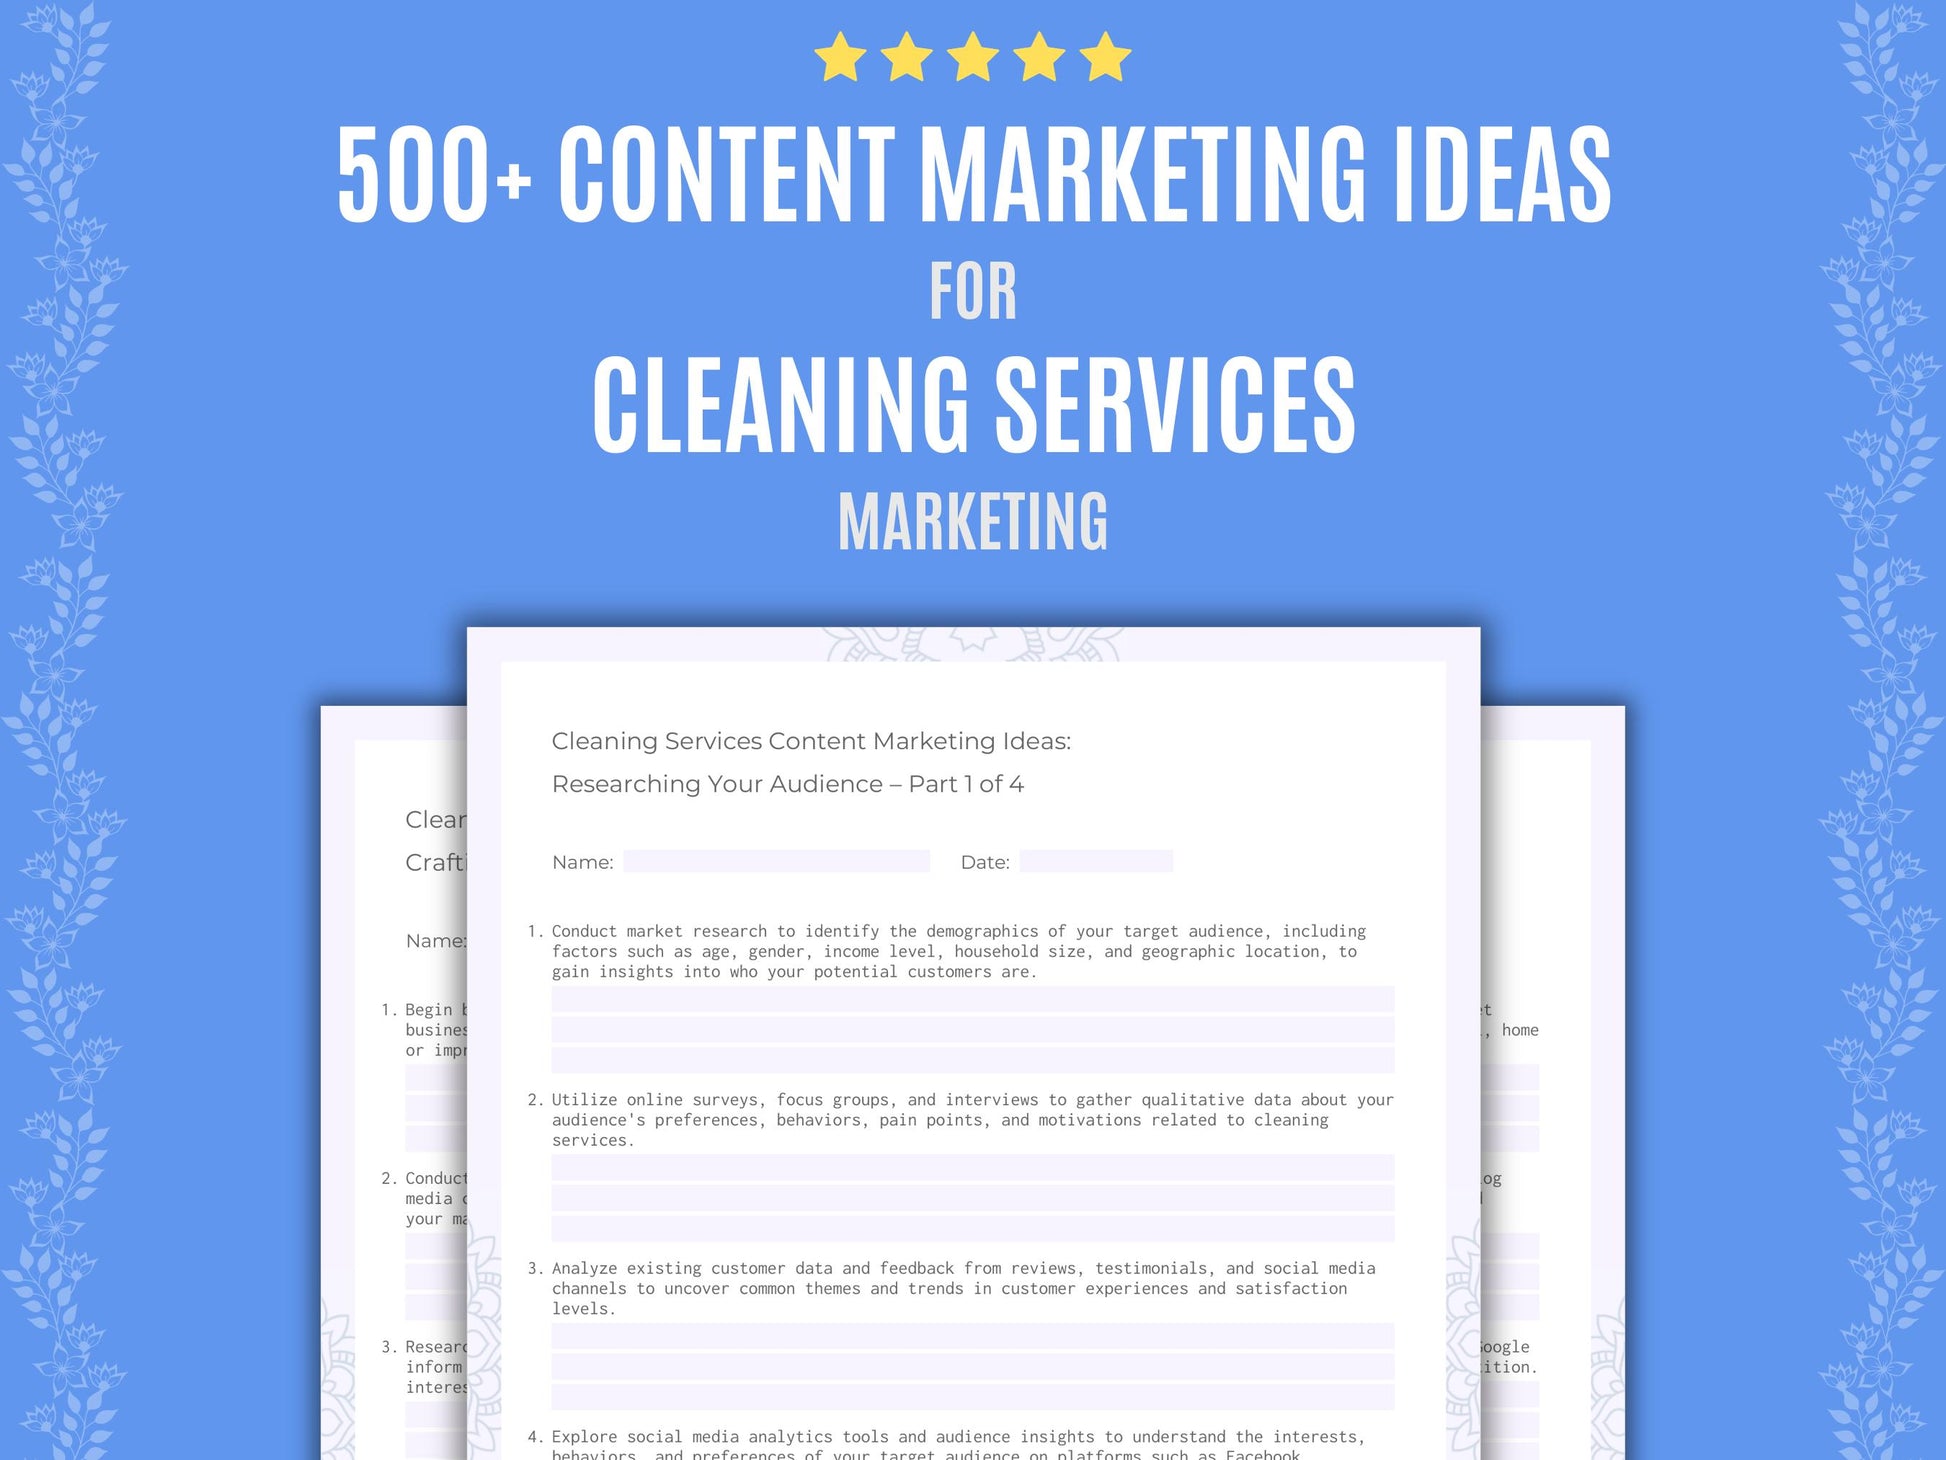 Cleaning Services Content Marketing Ideas